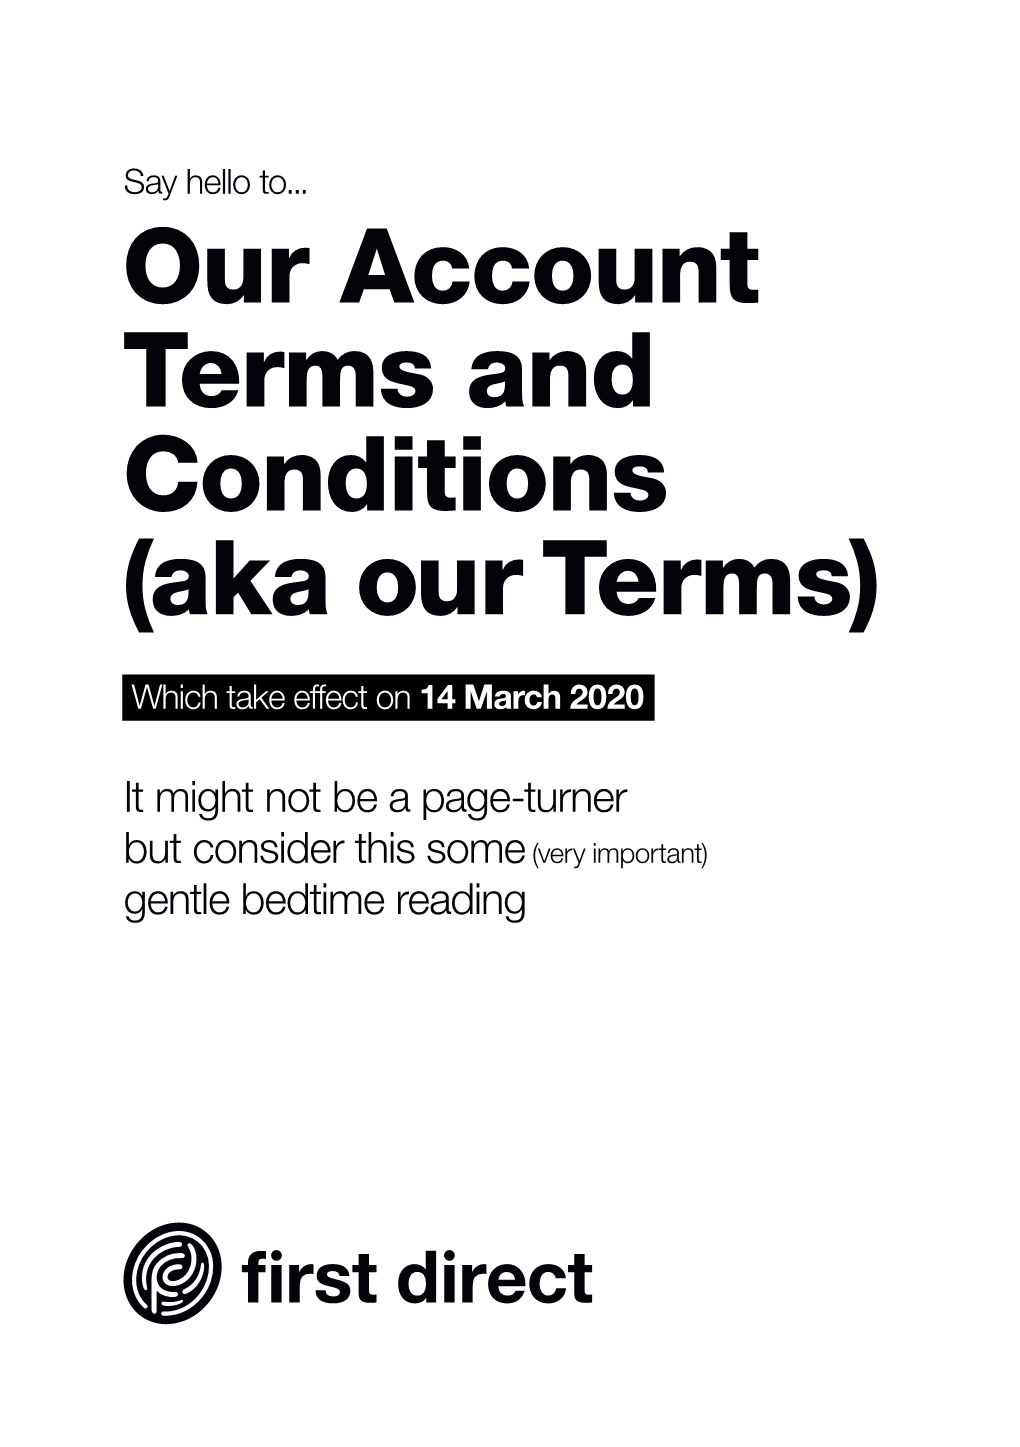 Our Account Terms and Conditions (Aka Our Terms)